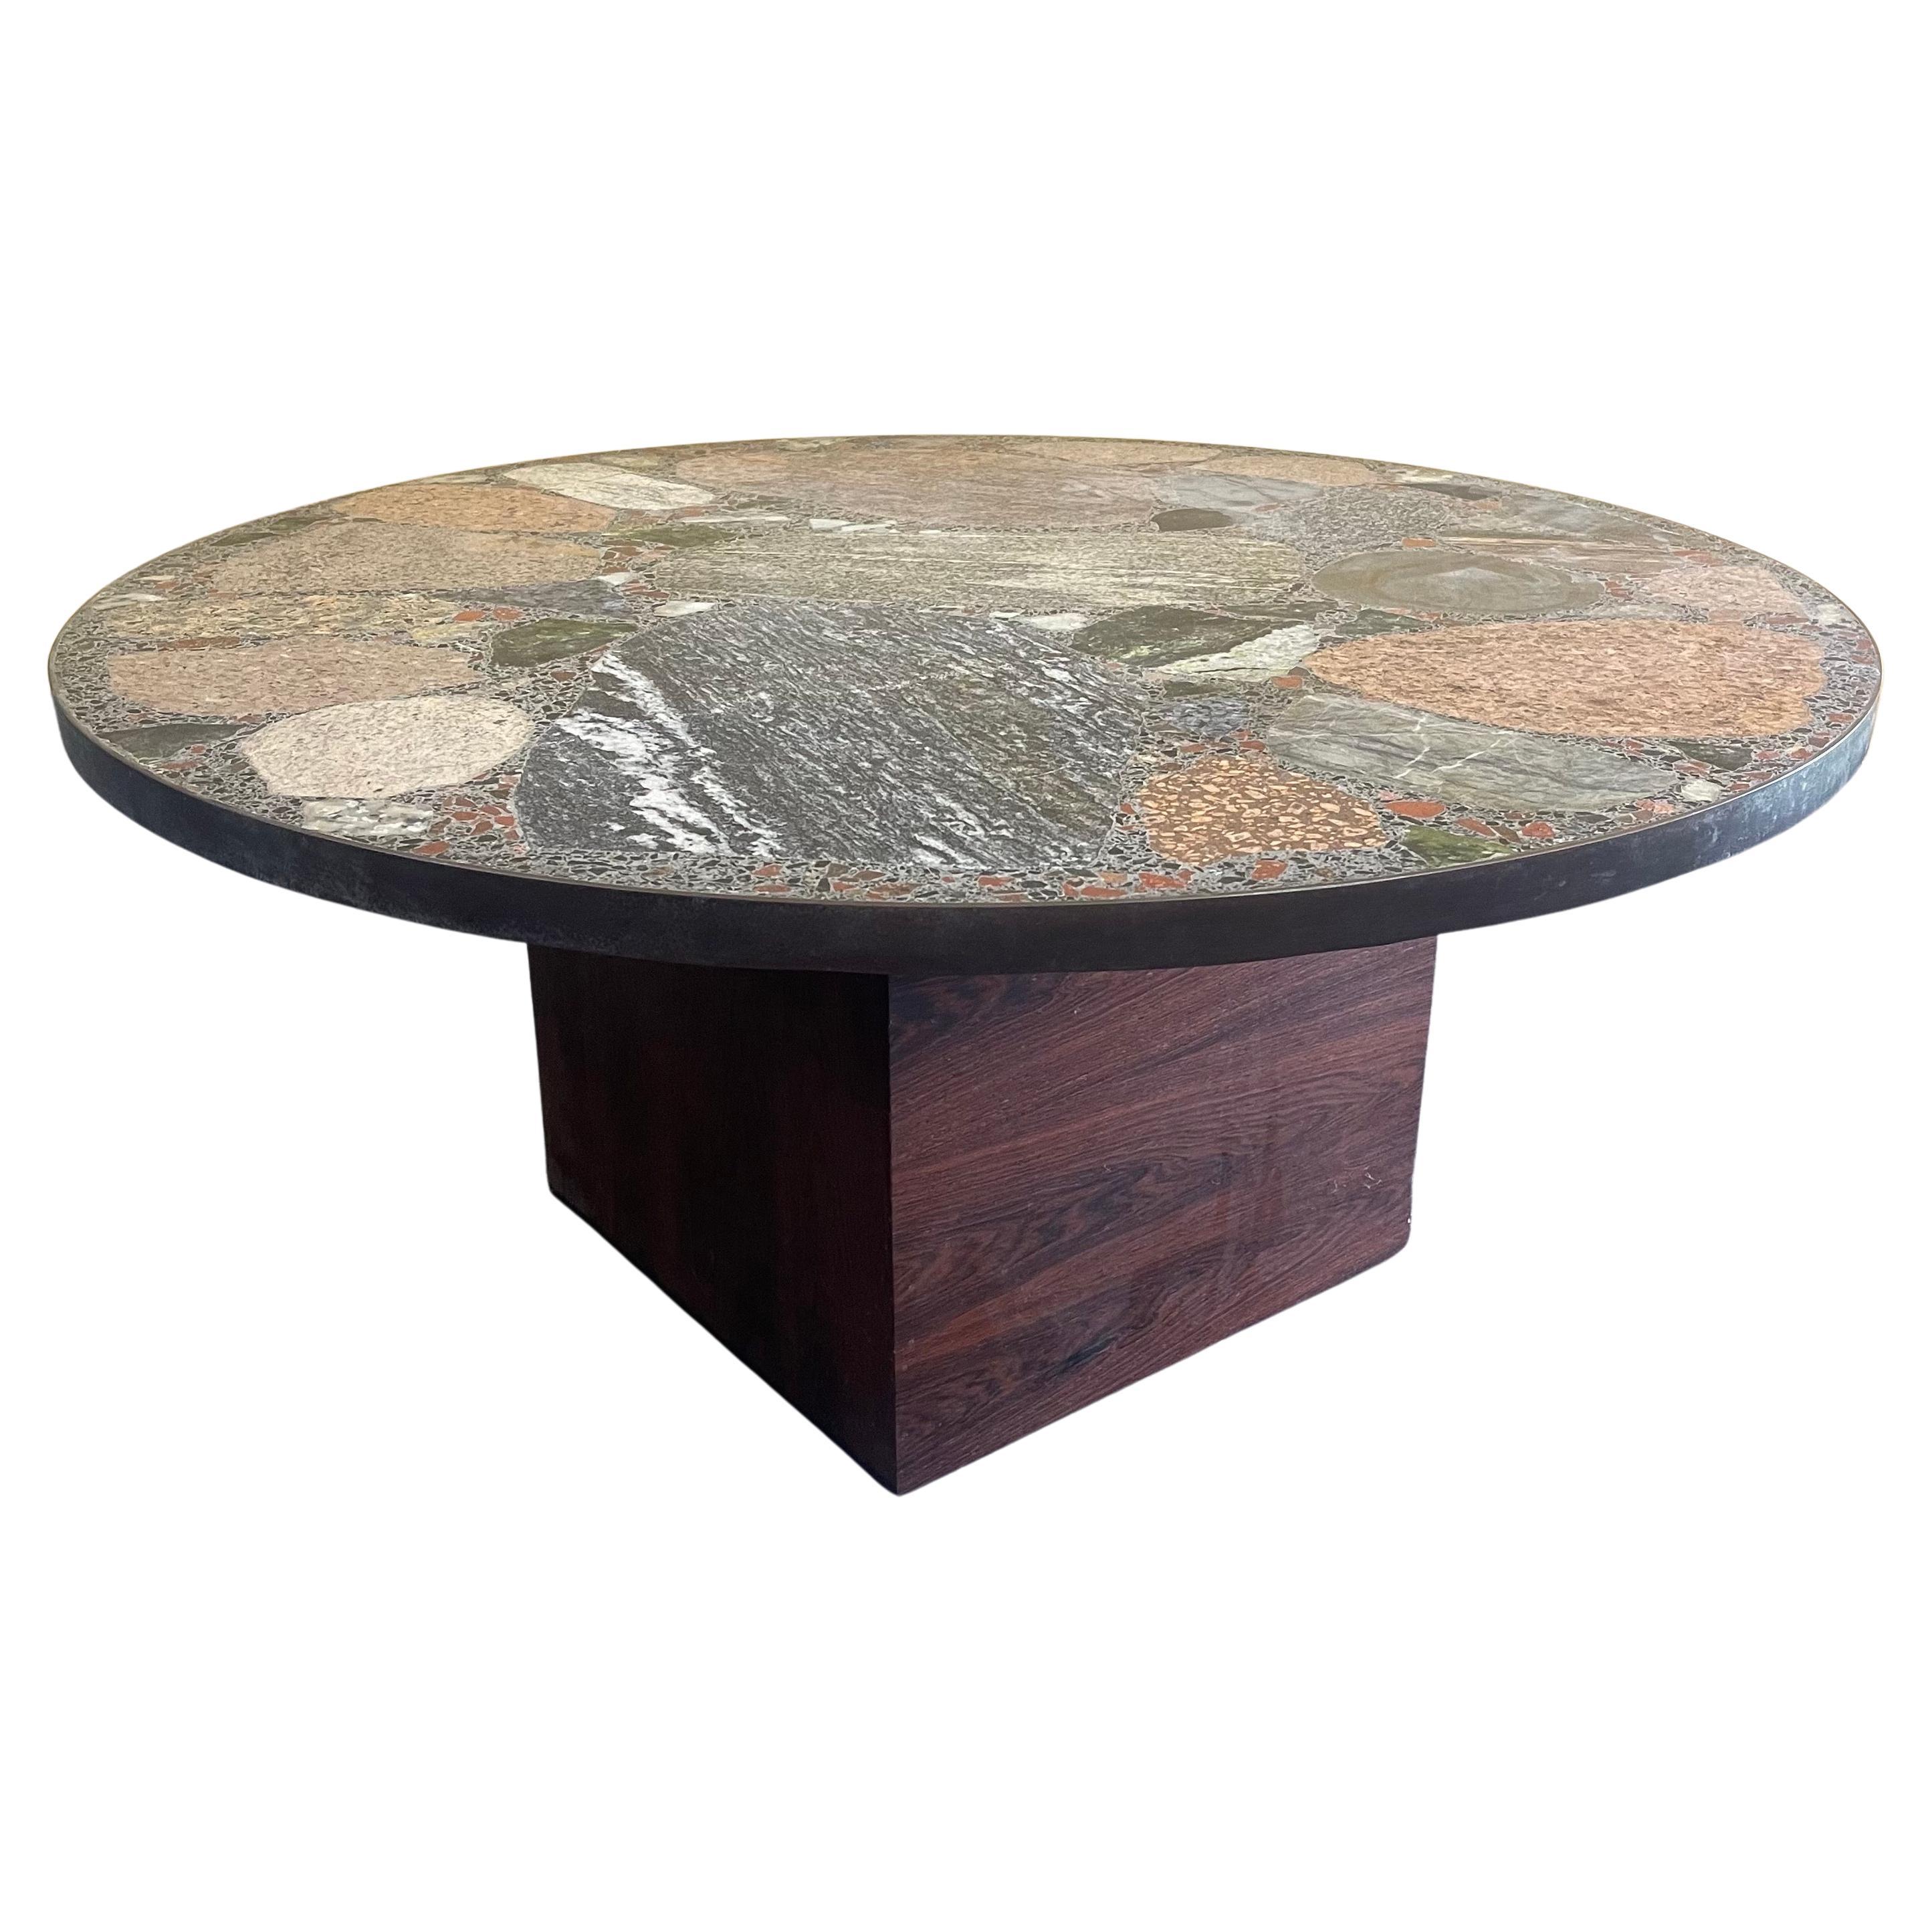 A gorgeous round terrazzo top coffee table by Erling Viksjo for A.S. Conglo, circa 1960s. The table is made of various Norwegian stones and concrete with a thin brass band and sits on a wooden cube. Viksjø was a Norwegian architect and designer best